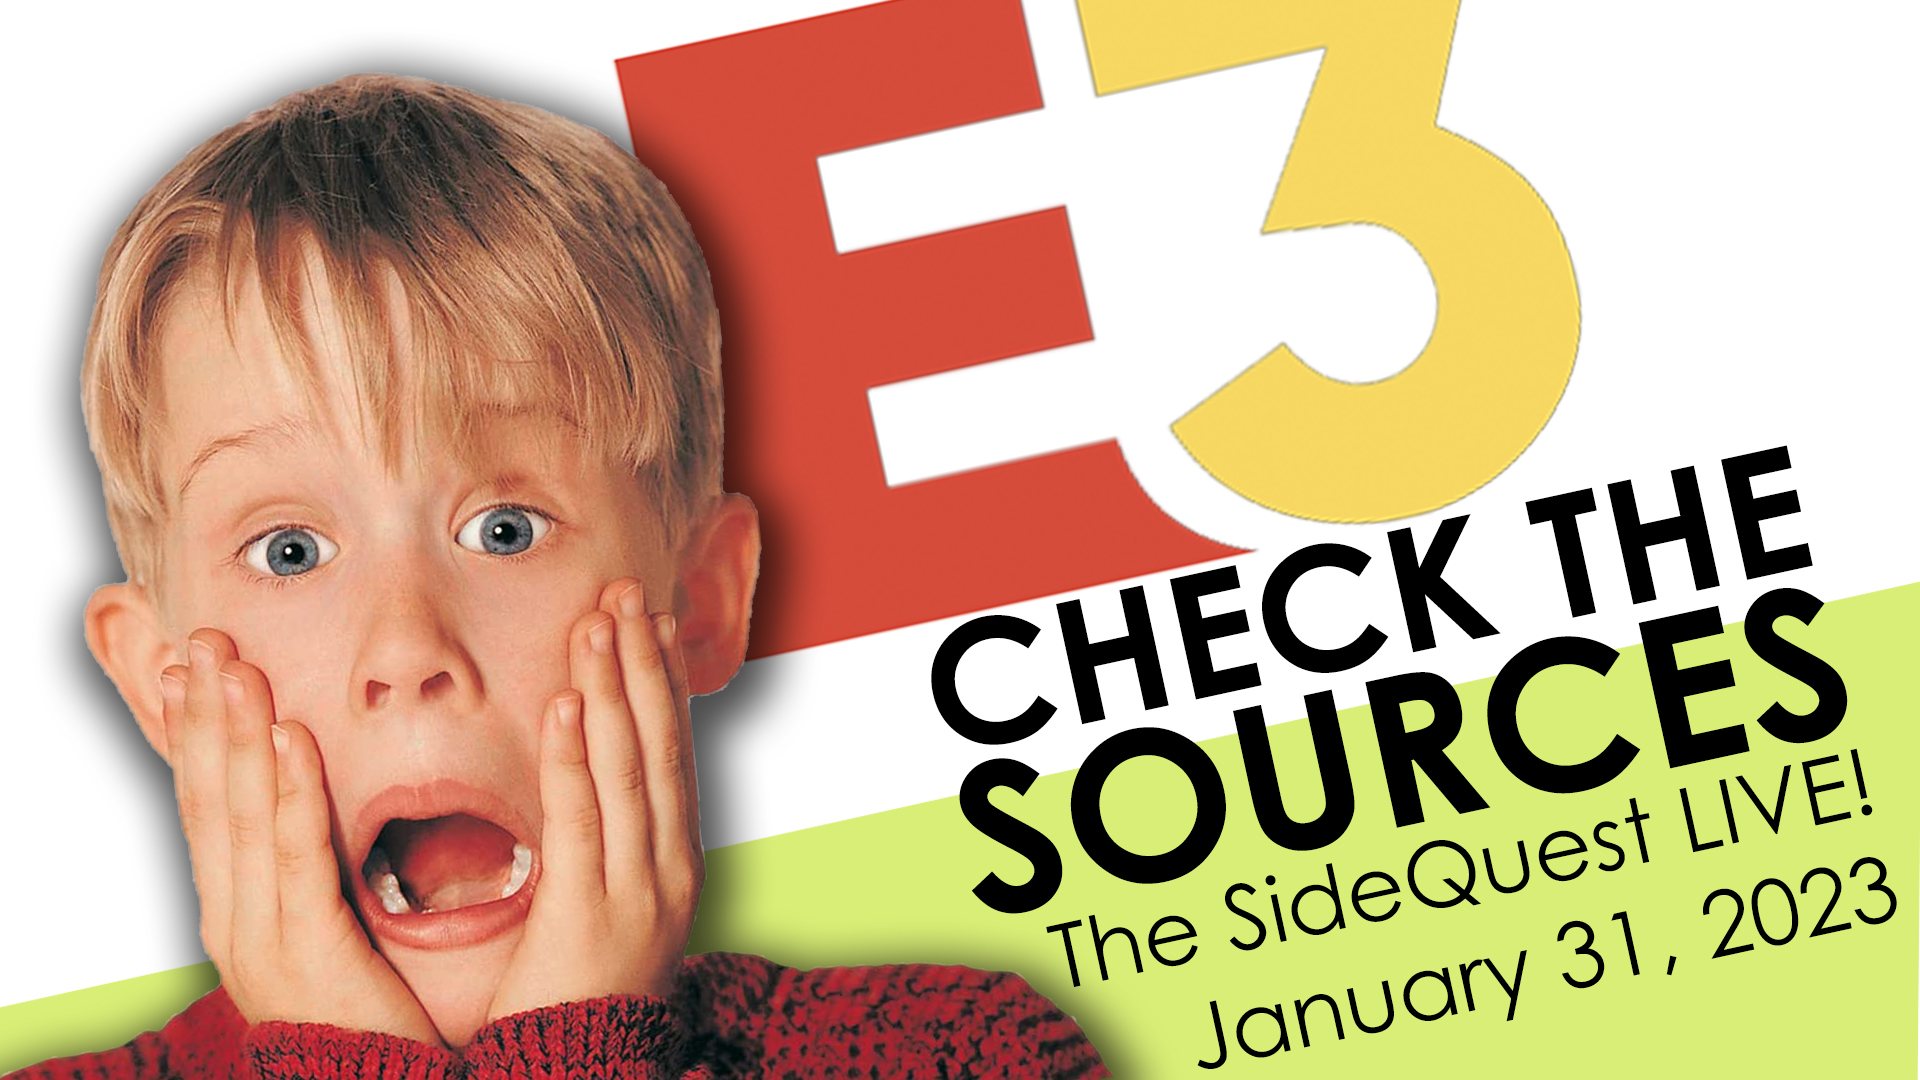 The SideQuest LIVE! January 31, 2023: CHECK THE SOURCE